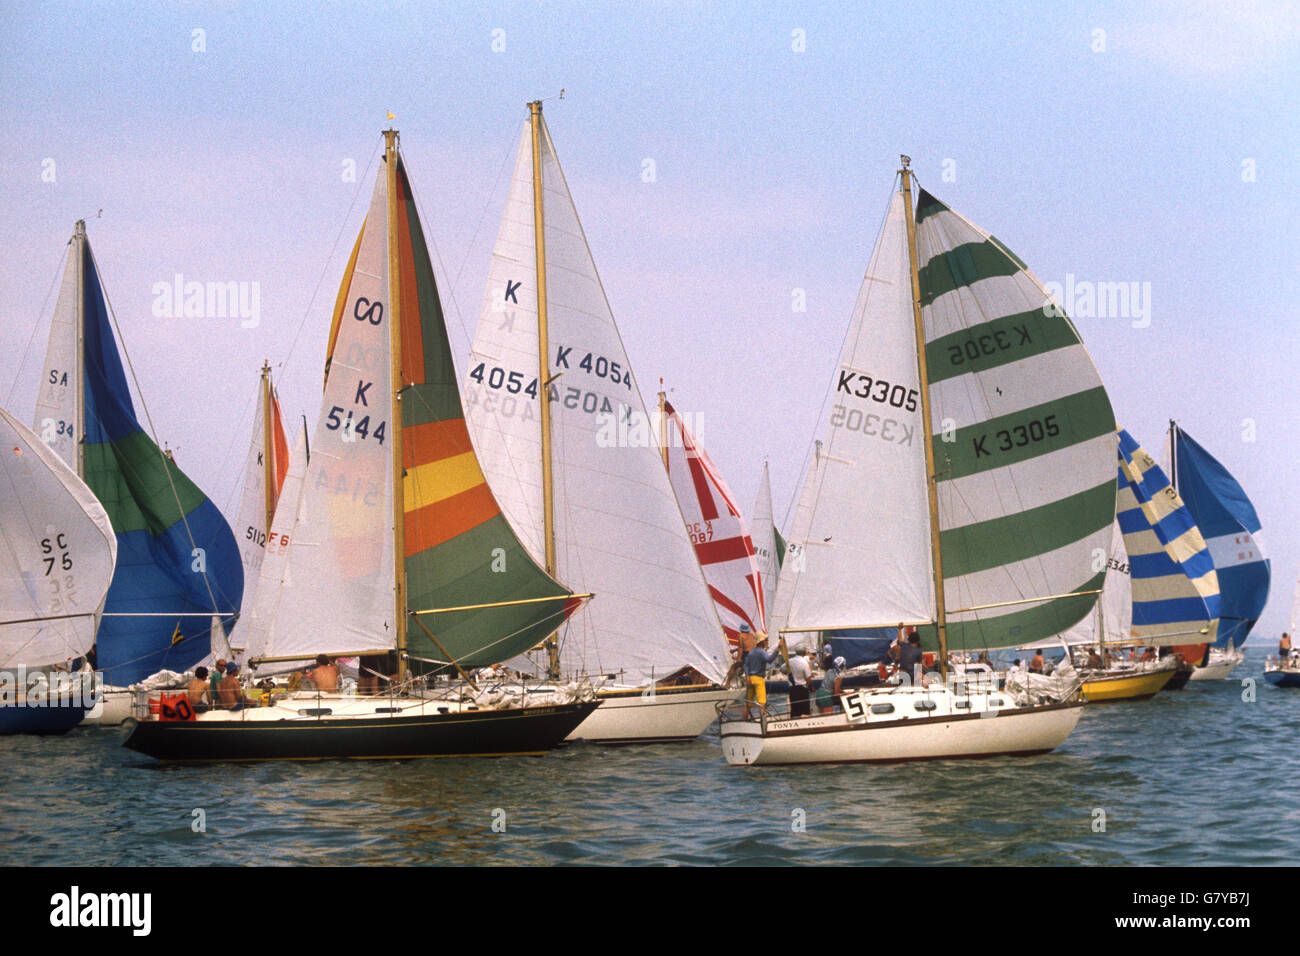 Sailing, Cowes Regatta Week. Massed sails in the Solent during Cowes Regatta Week. Stock Photo